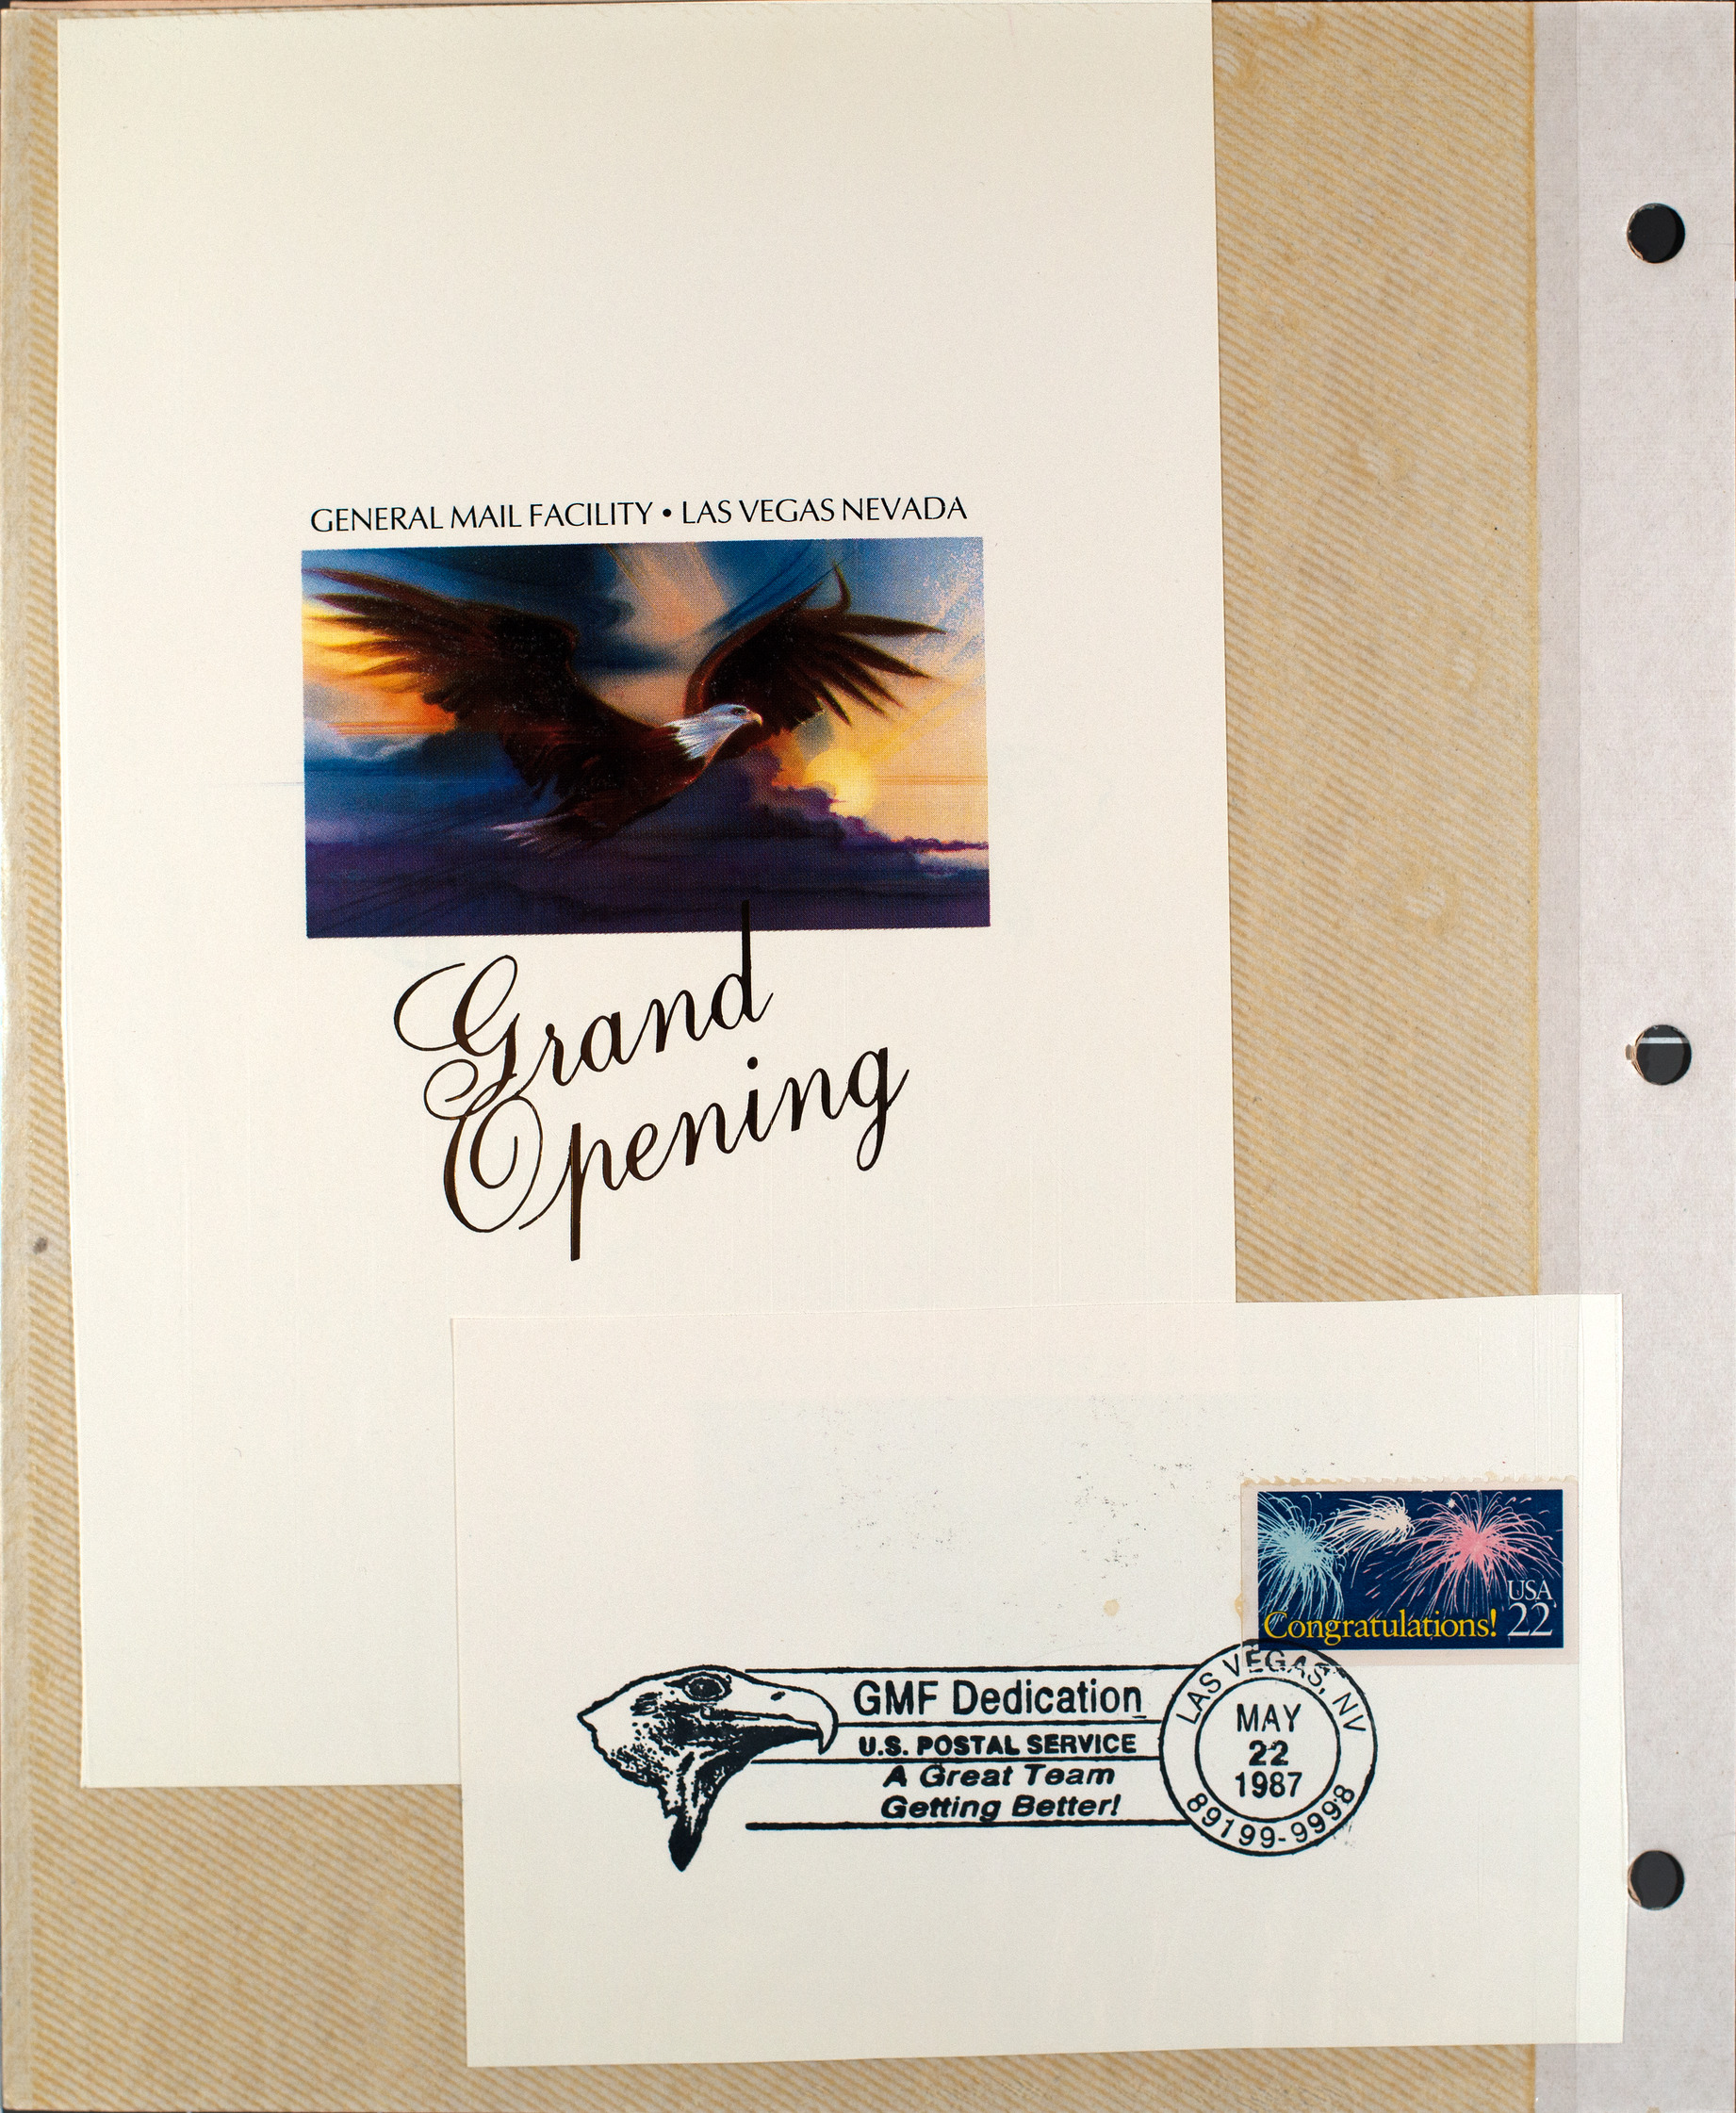 Program for the grand opening of the general mail facility in Las Vegas, Nevada